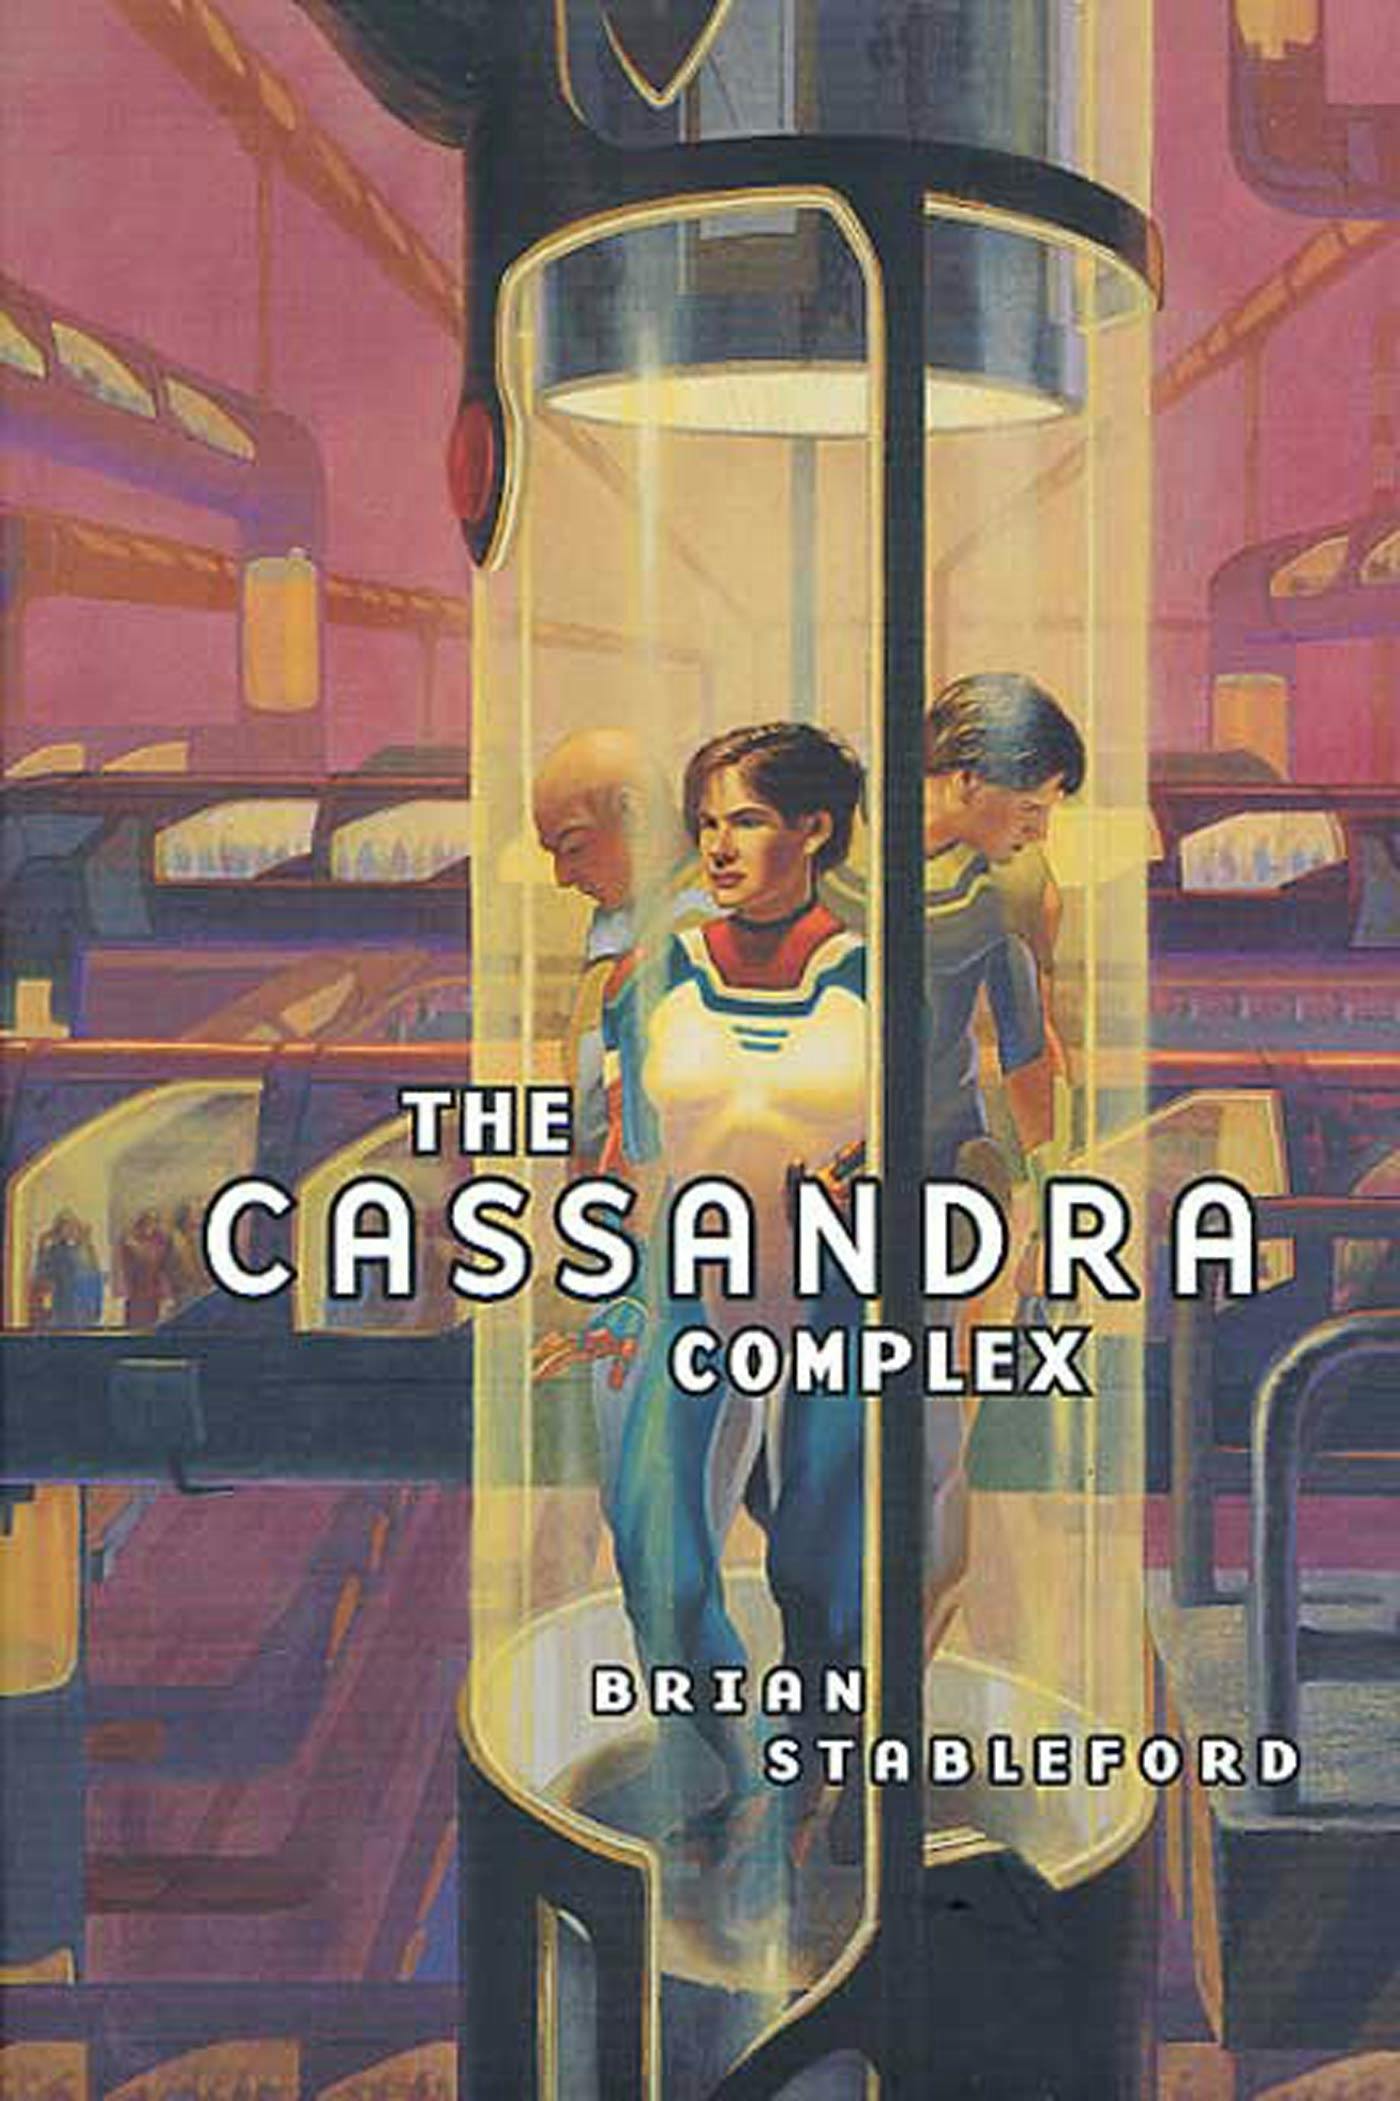 Cover for the book titled as: The Cassandra Complex